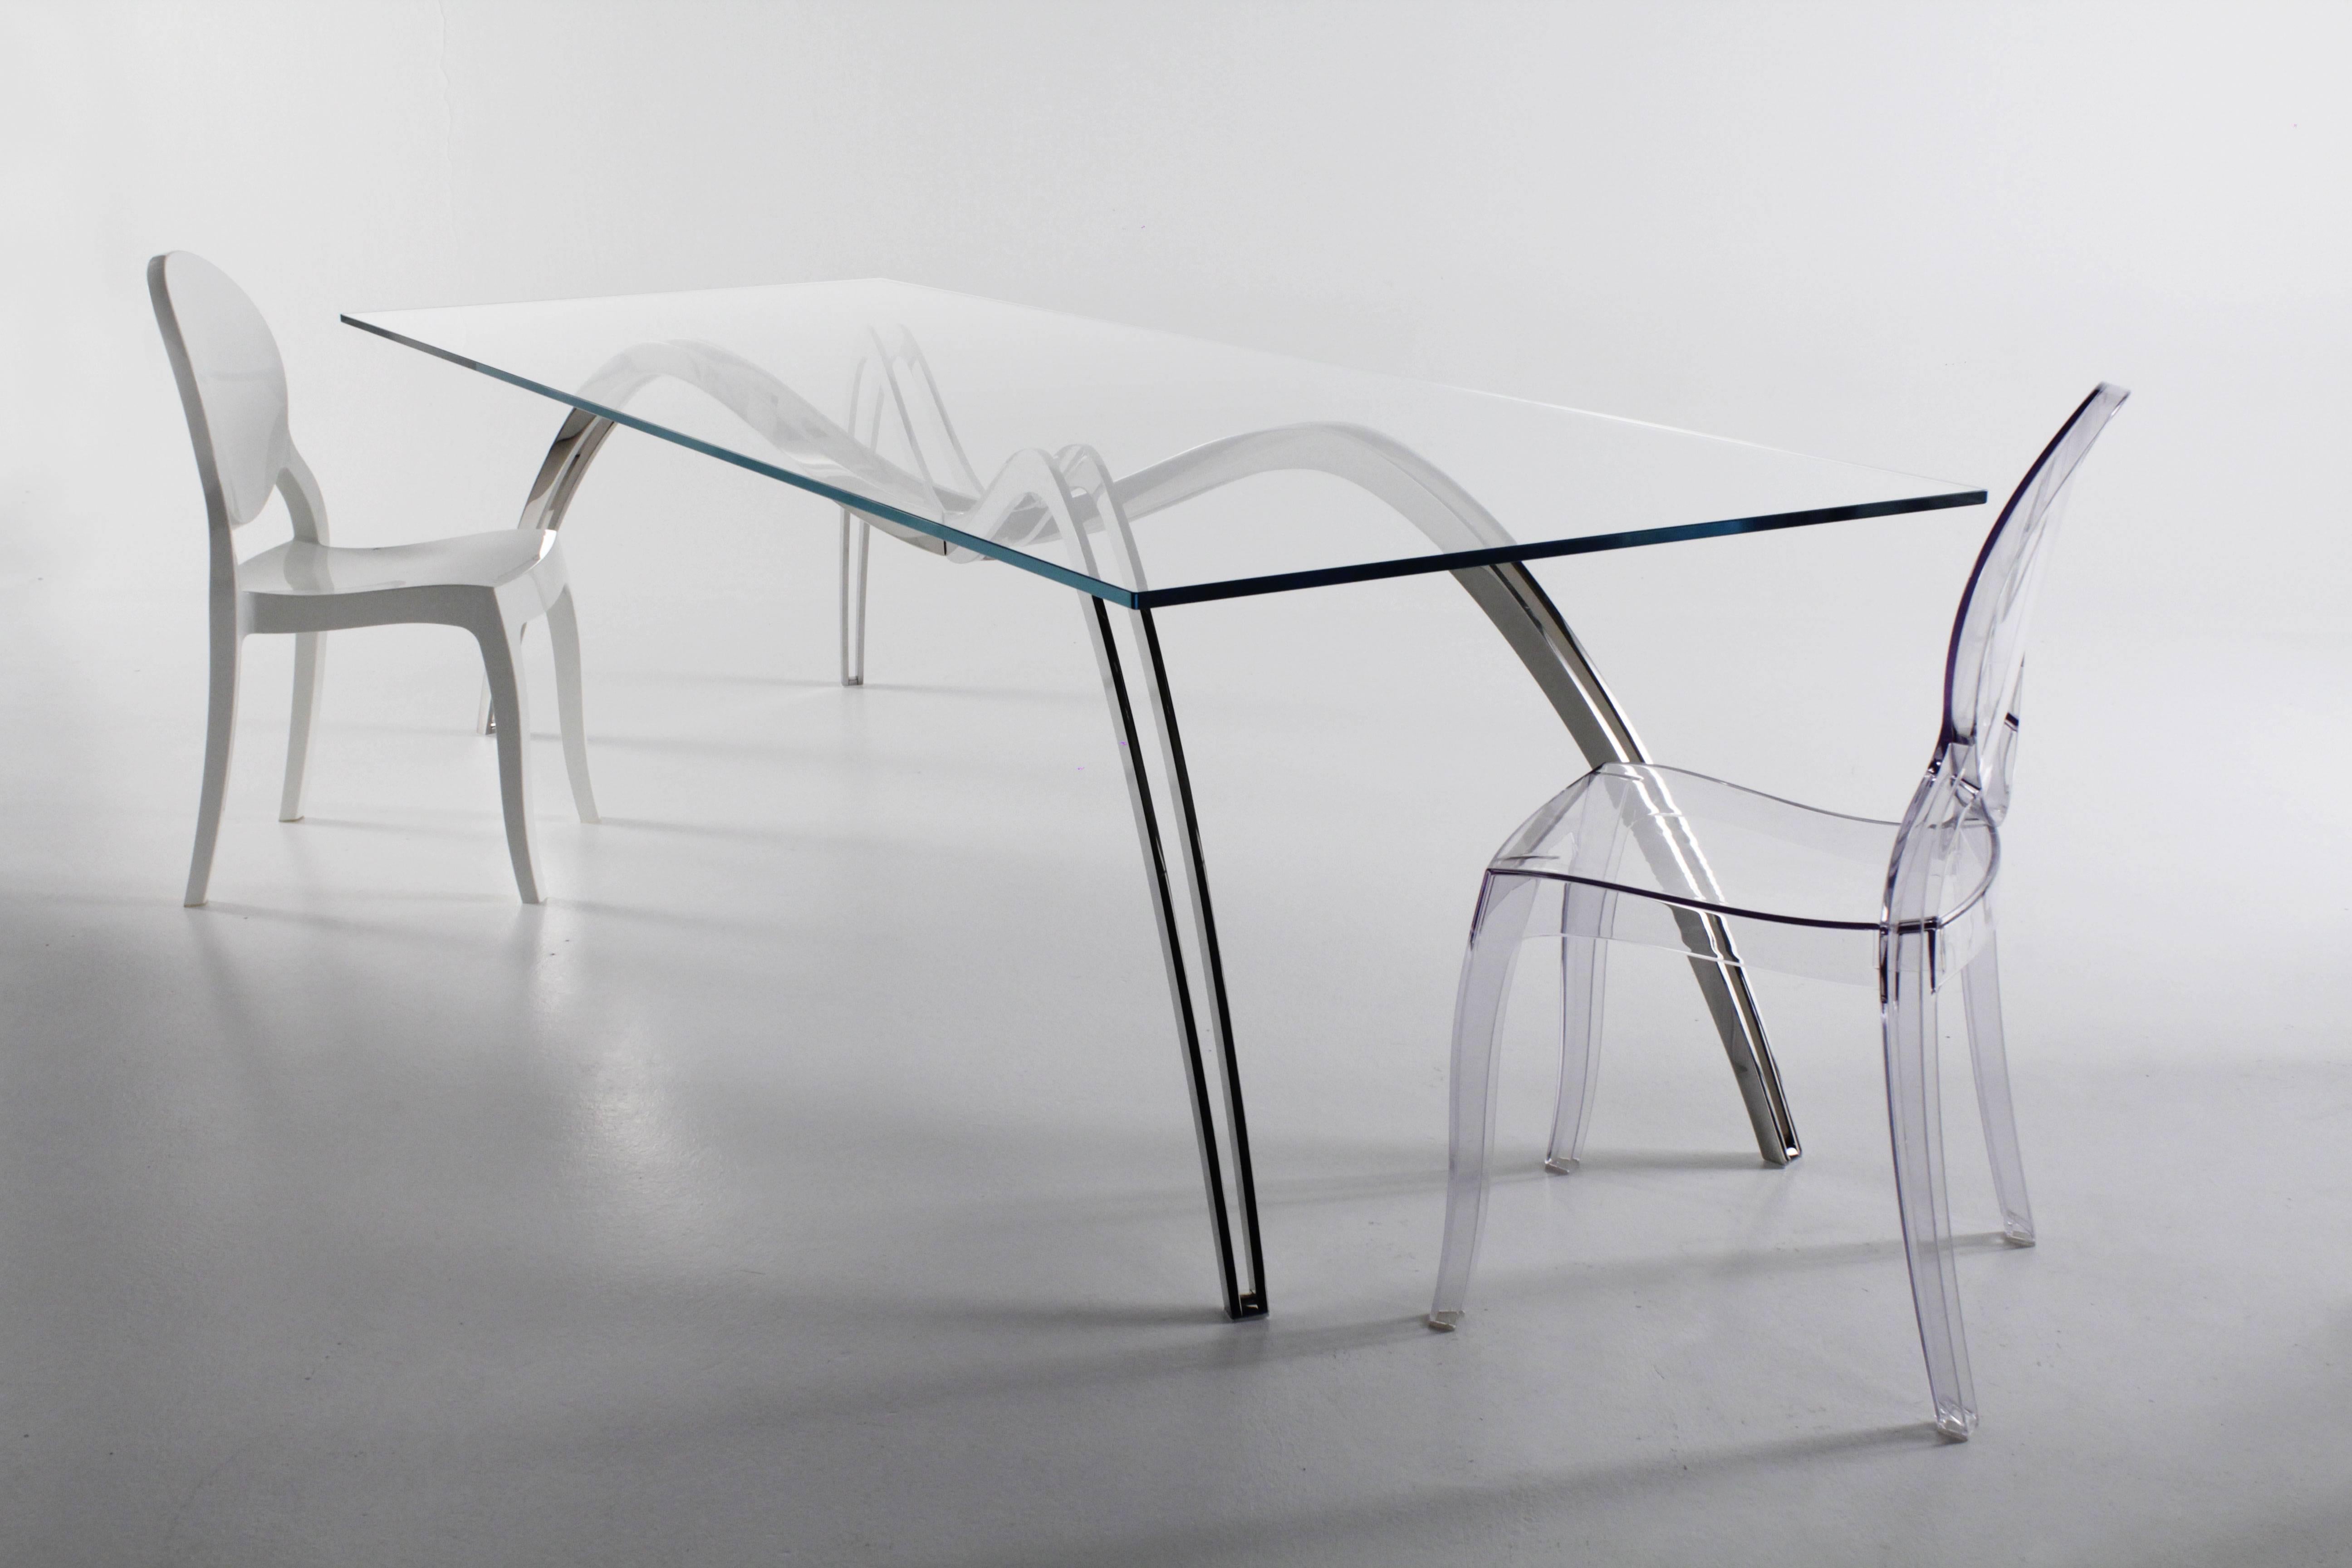 The 'Spider Skeleton' dining table is made of mirror polished stainless and table top in extra-clear crystal glass.

Dining table dimension: L 270 x W 100 x  H 76 cm. Dimensions are customizable.

Limited Edition of 15.

Each table is hand signed